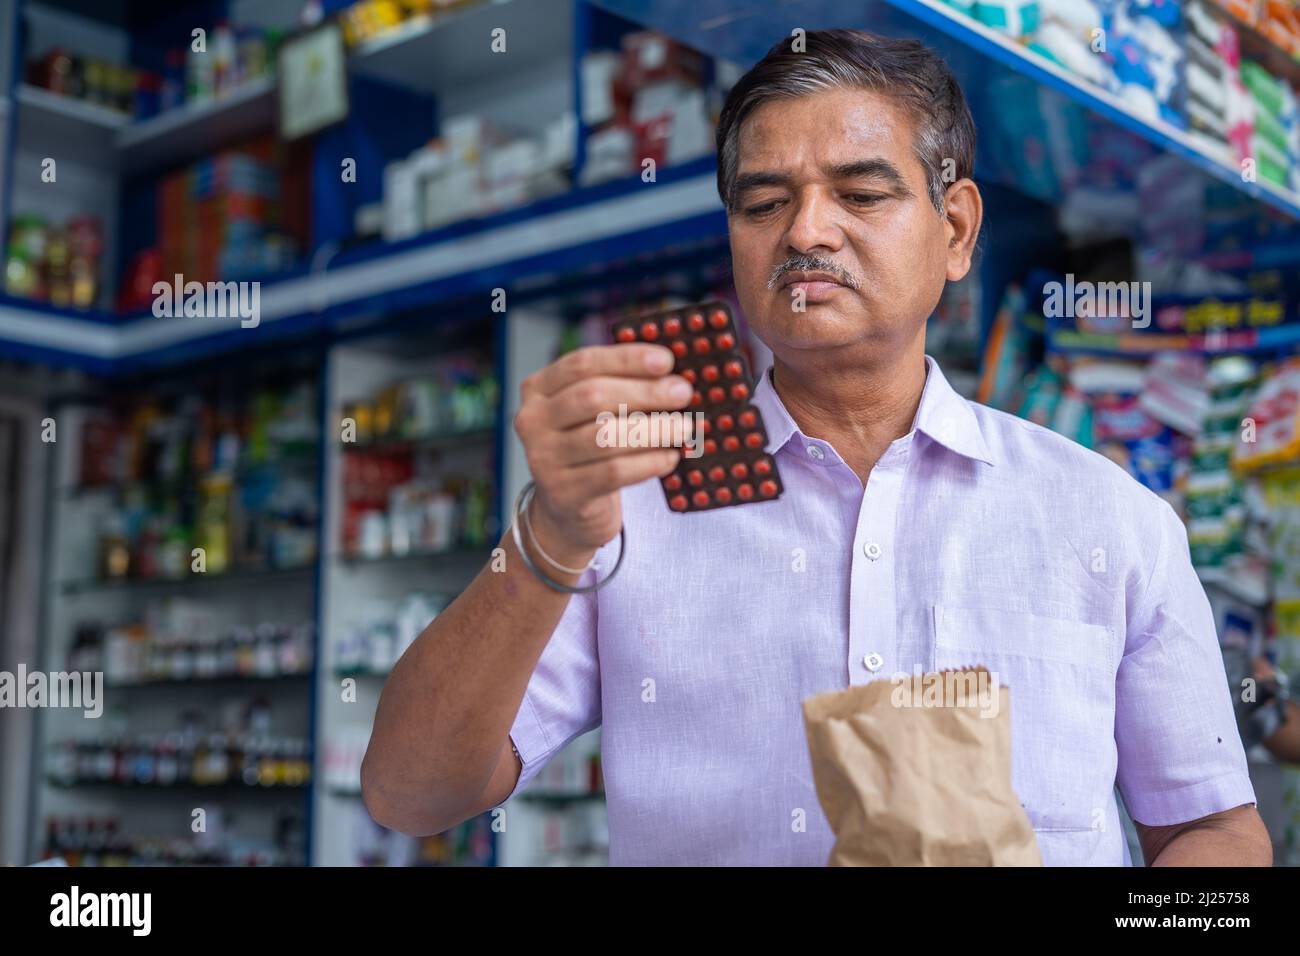 customer checking medicine price and expiry date at retail medical shop after purchasing - concept of shopping, consumer awareness, pharmacist and Stock Photo